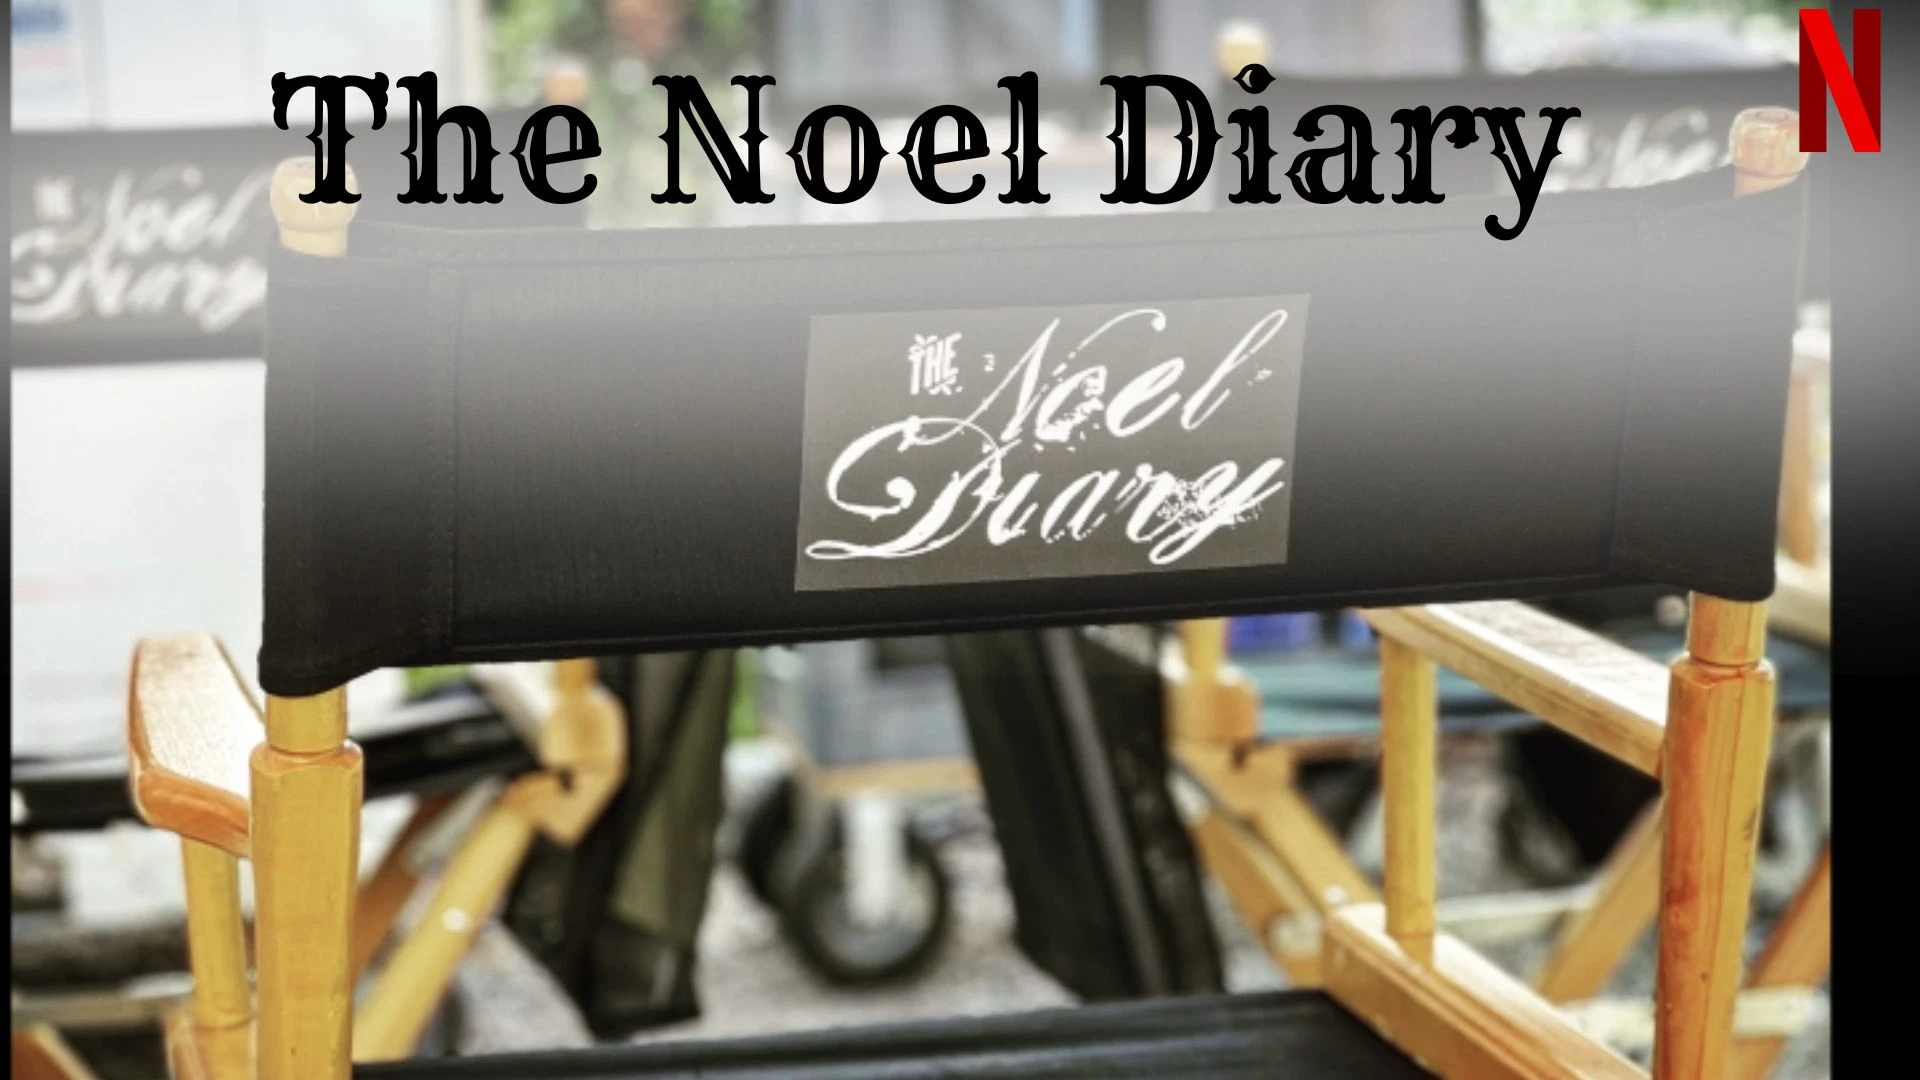 The Noel Diary Parents Guide and Age Rating (2022)